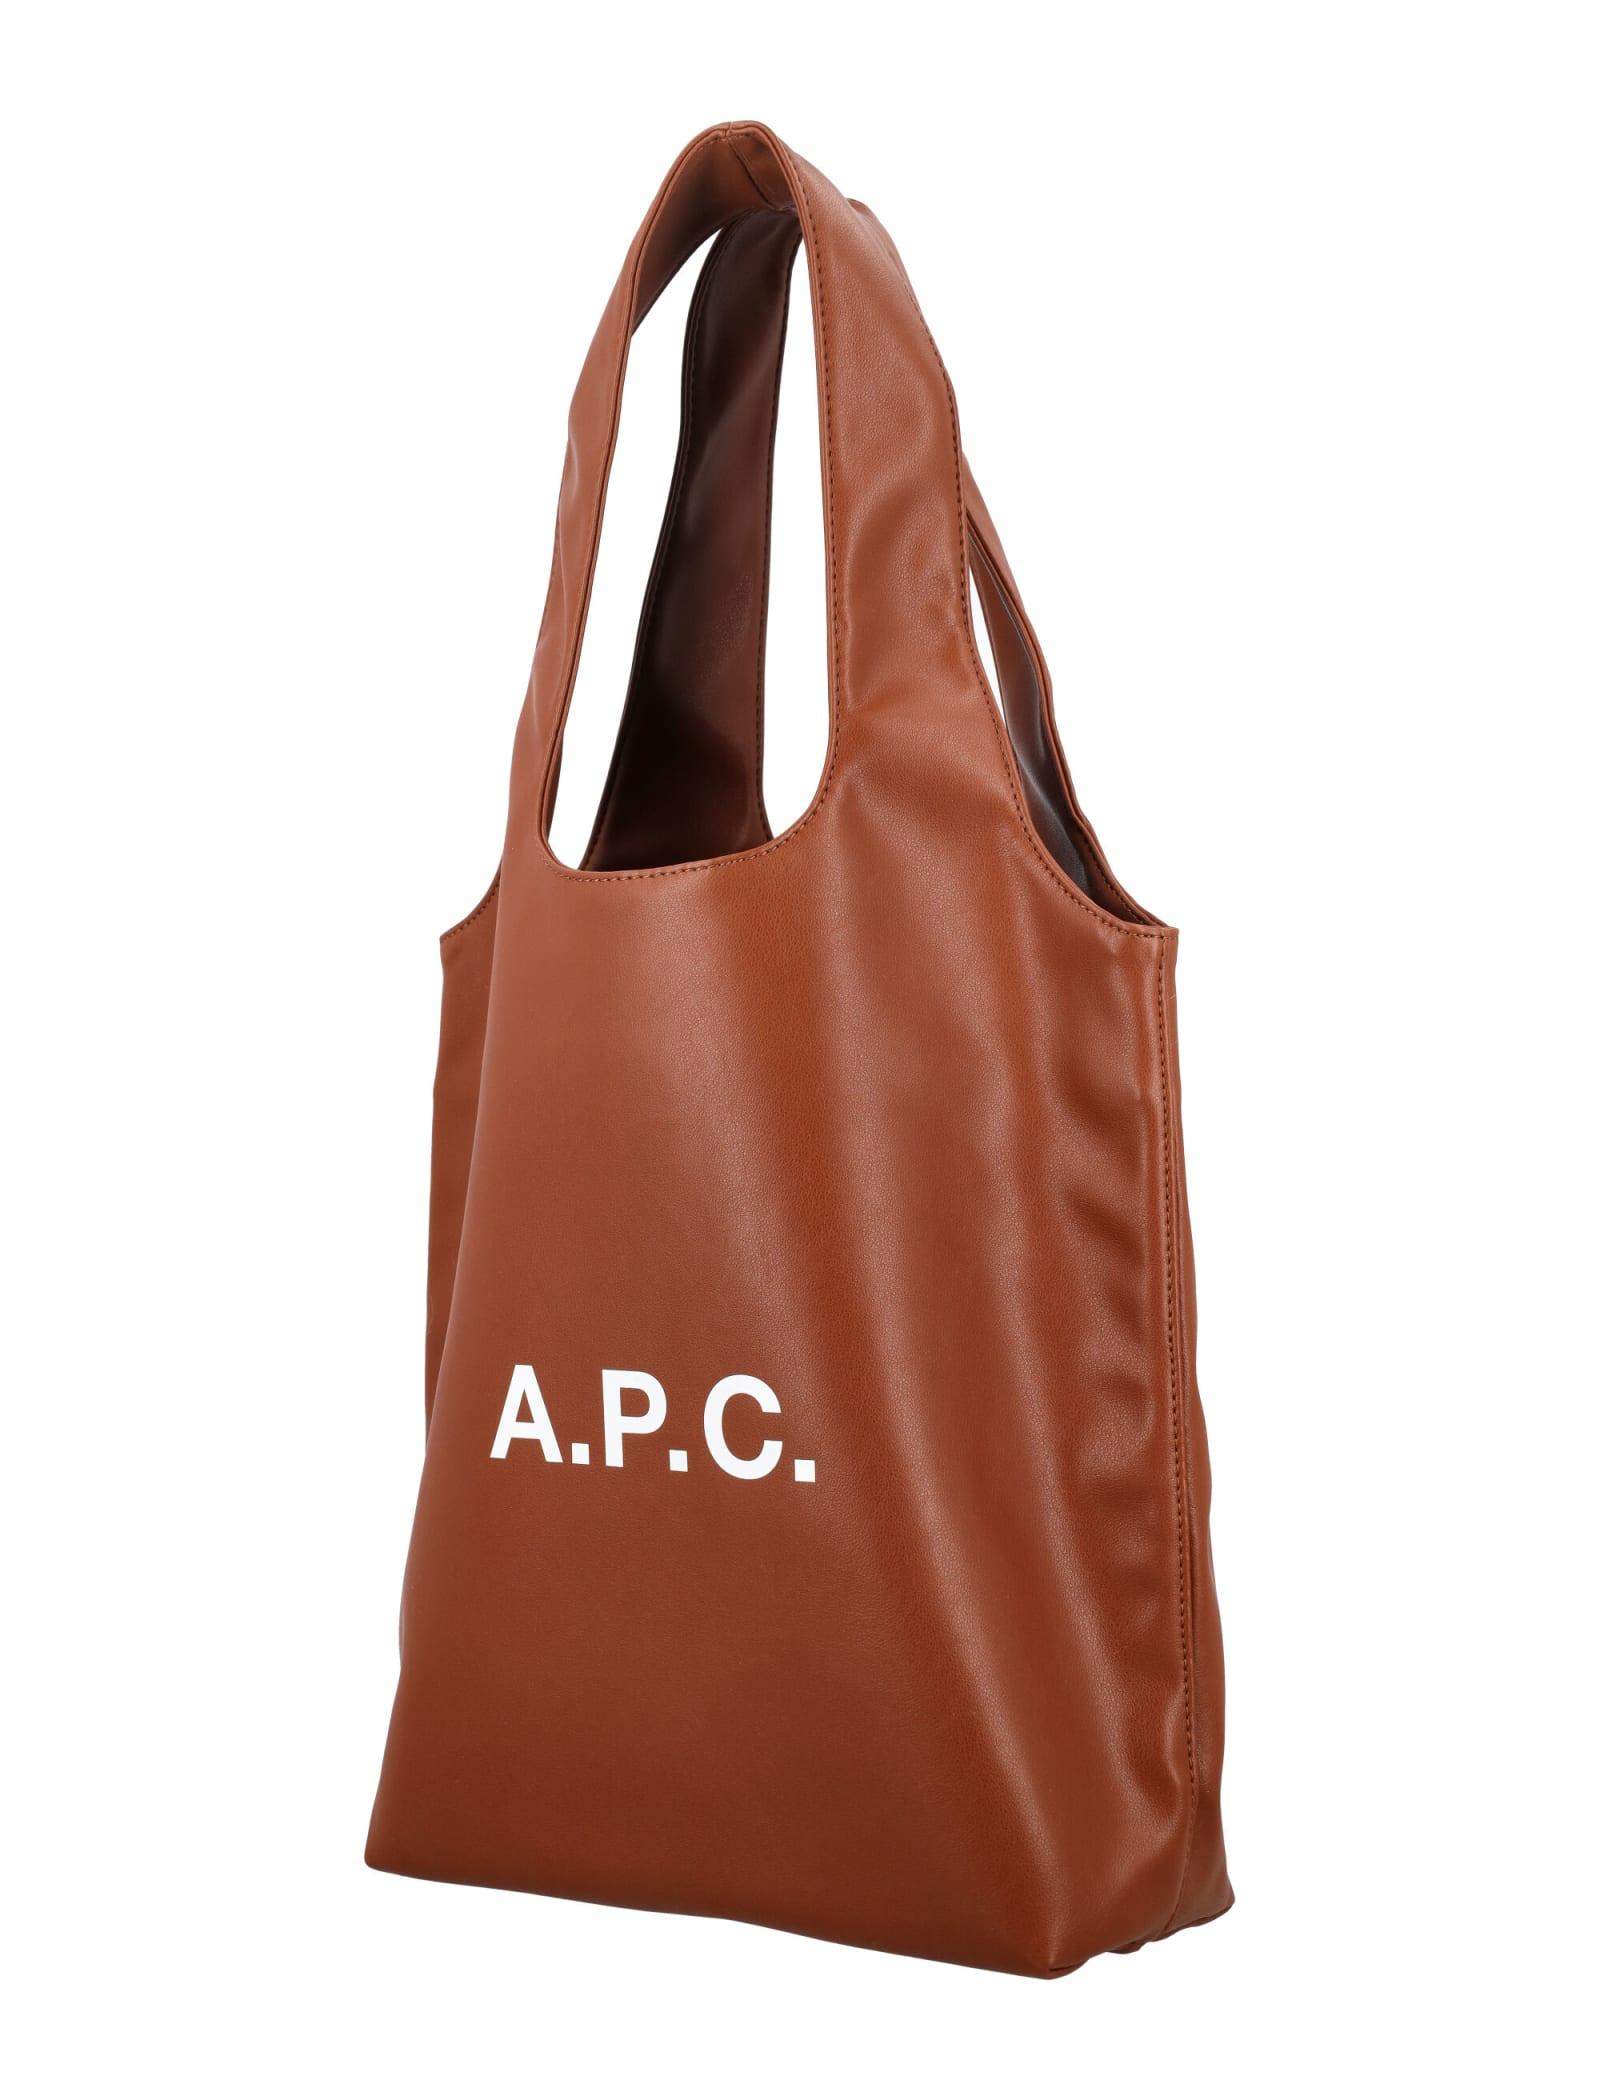 A.P.C. Ninon Small Tote Bag in Brown | Lyst